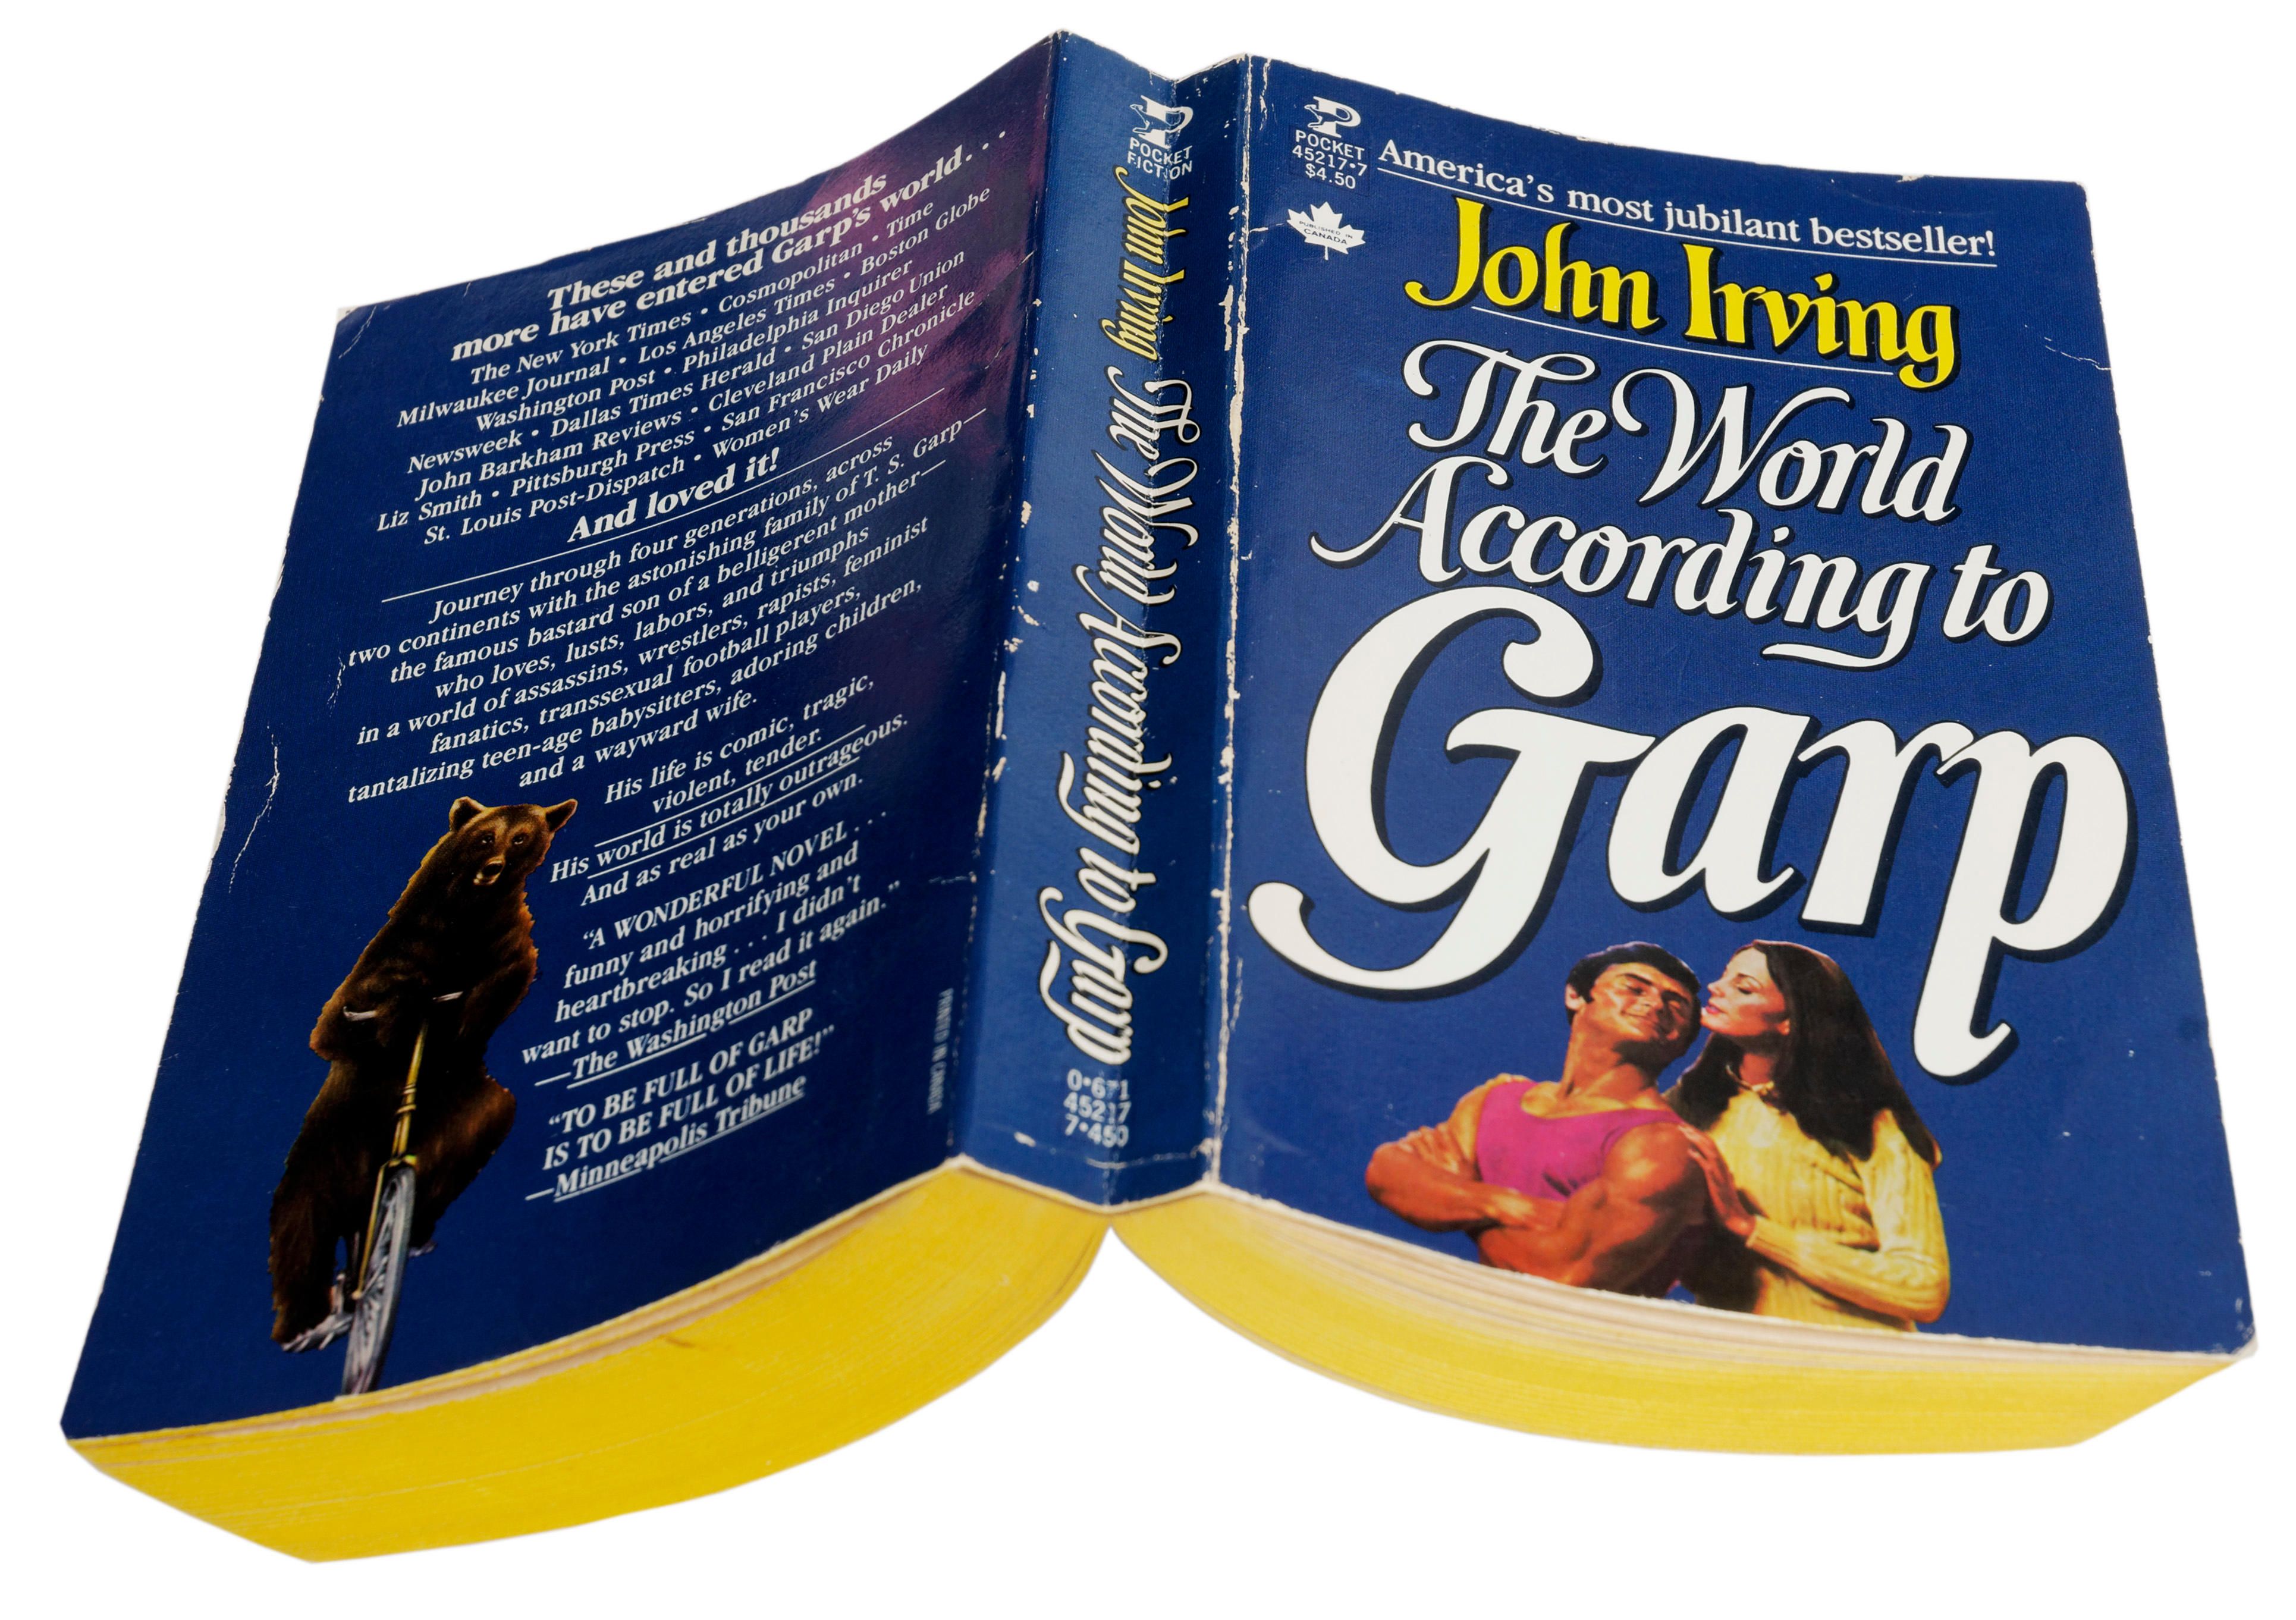 Read The World According to Garp 40th Anniversary Edition Forward By John Irving